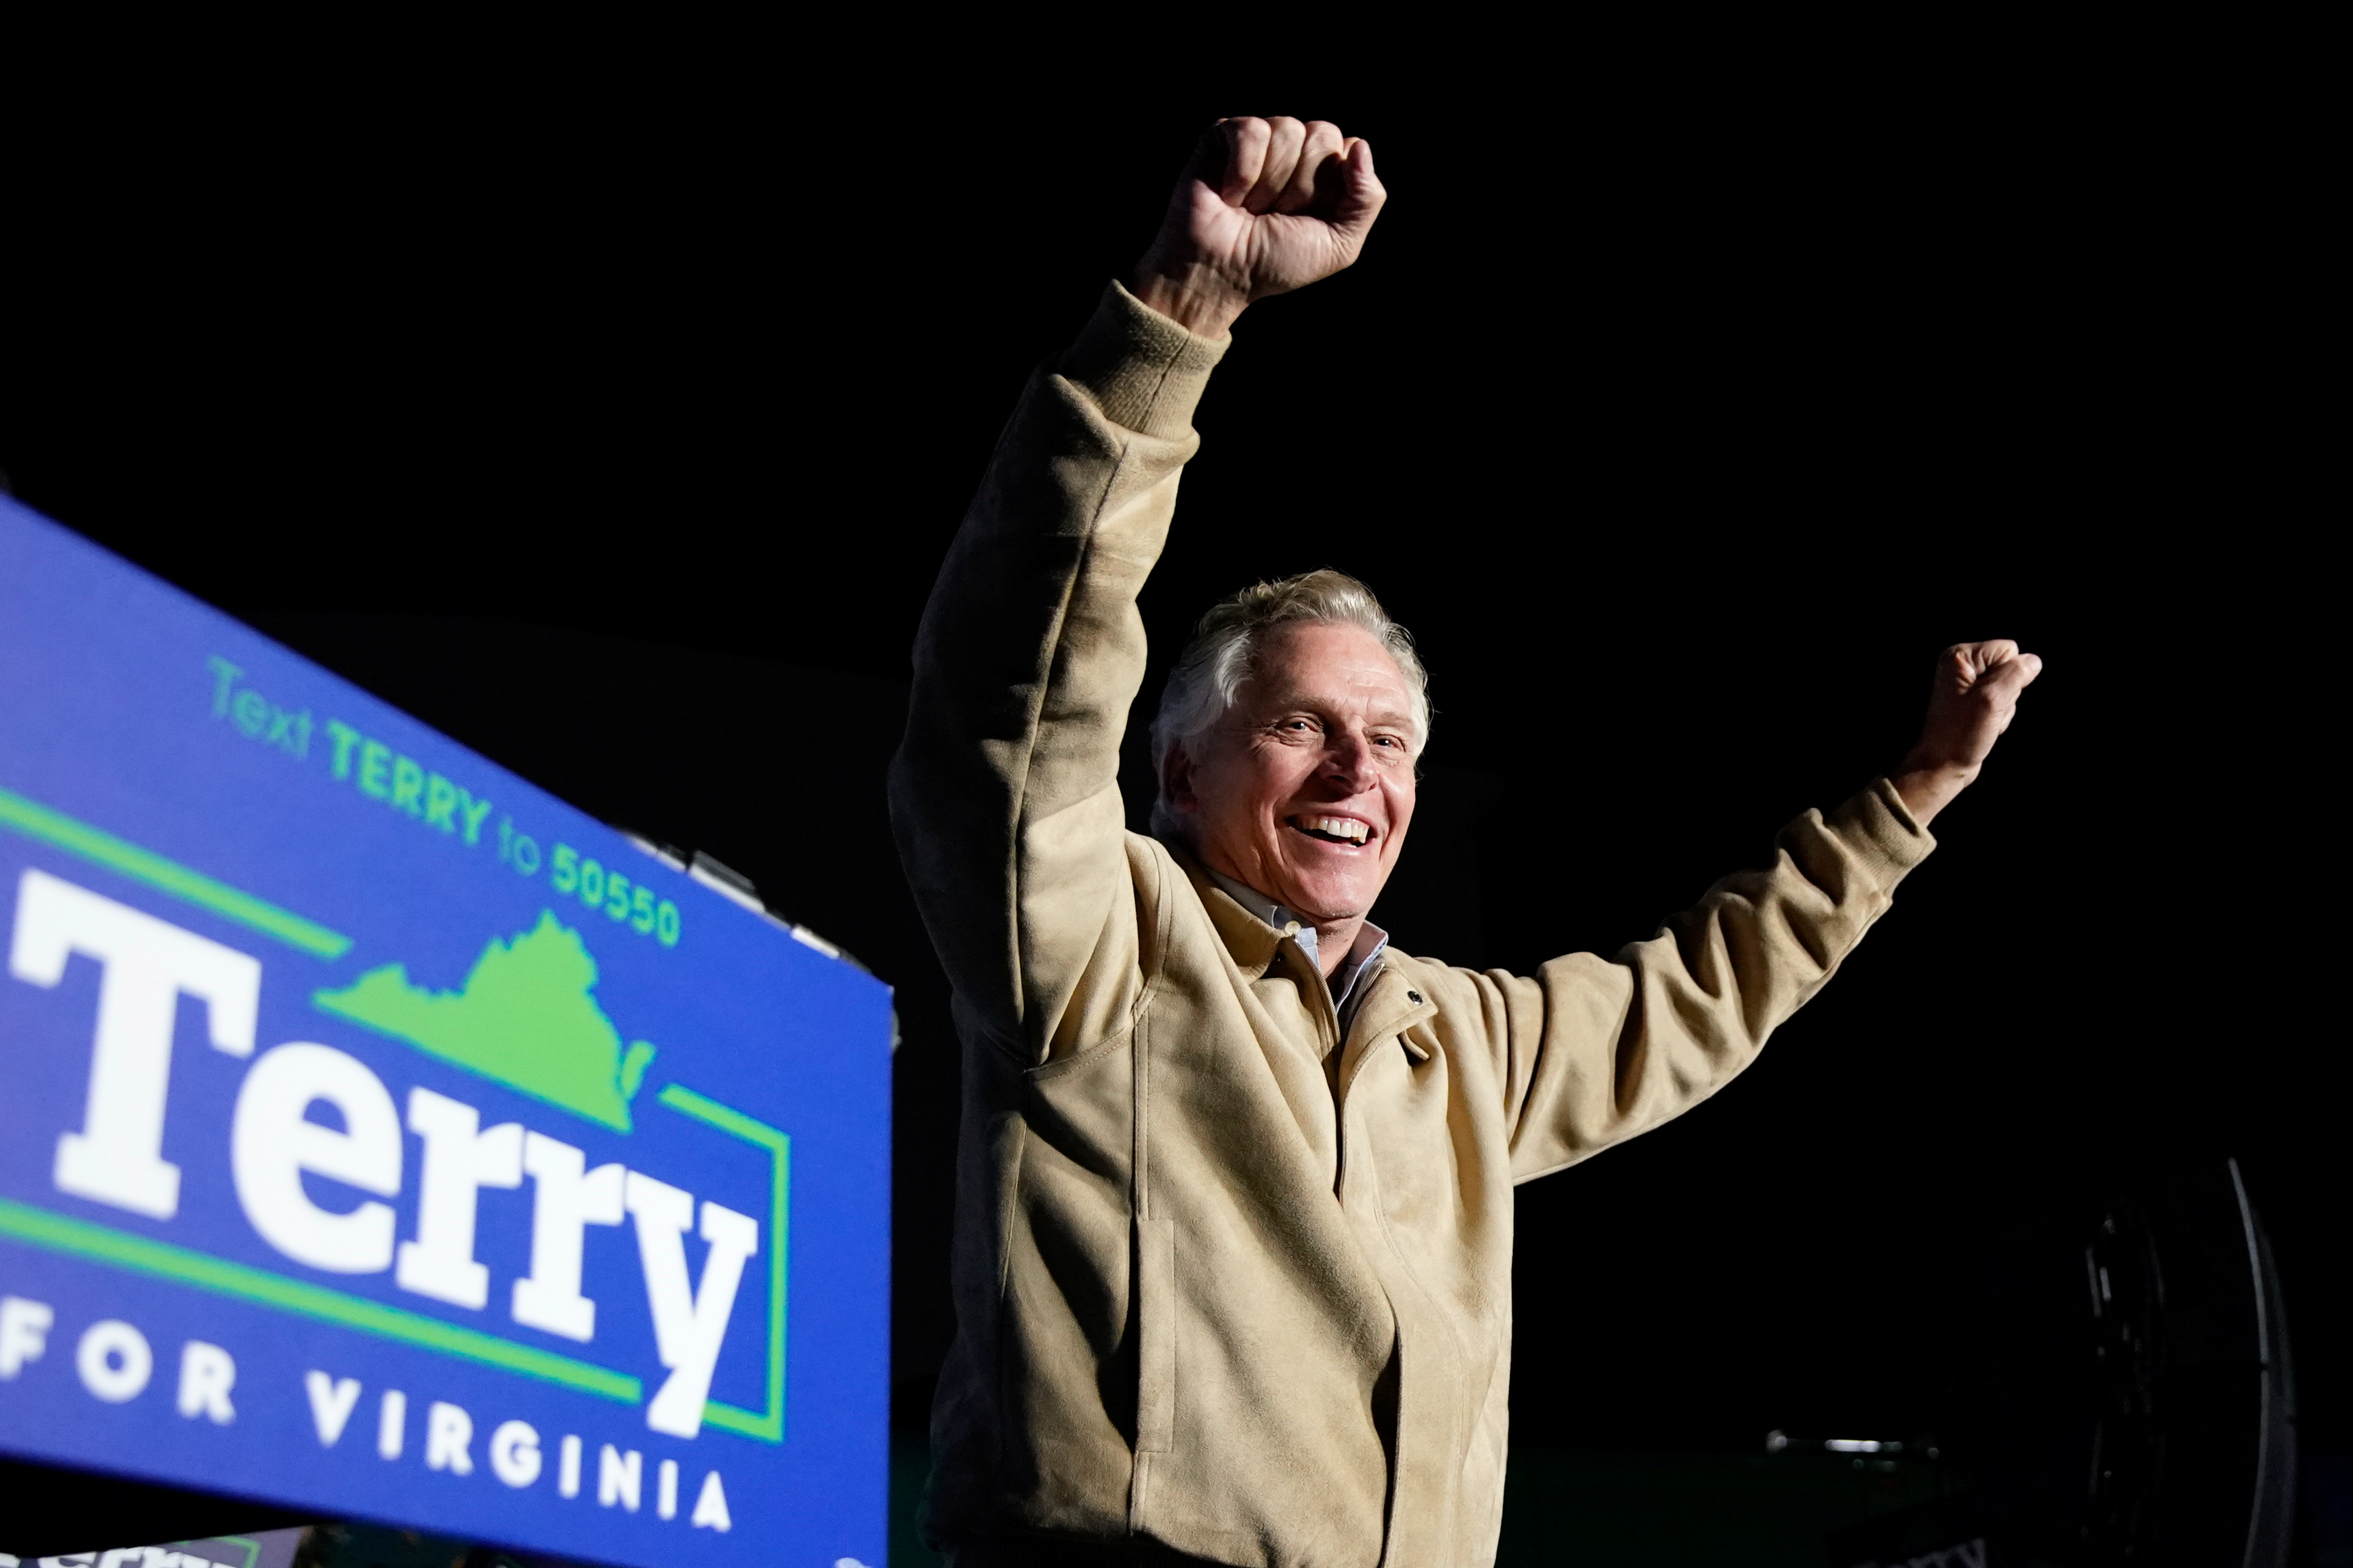 Virginia Democratic gubernatorial nominee and former governor Terry McAuliffe takes the stage during a campaign event at Caboose Commons in Fairfax, Virginia, U.S., November 1, 2021. REUTERS/Elizabeth Frantz